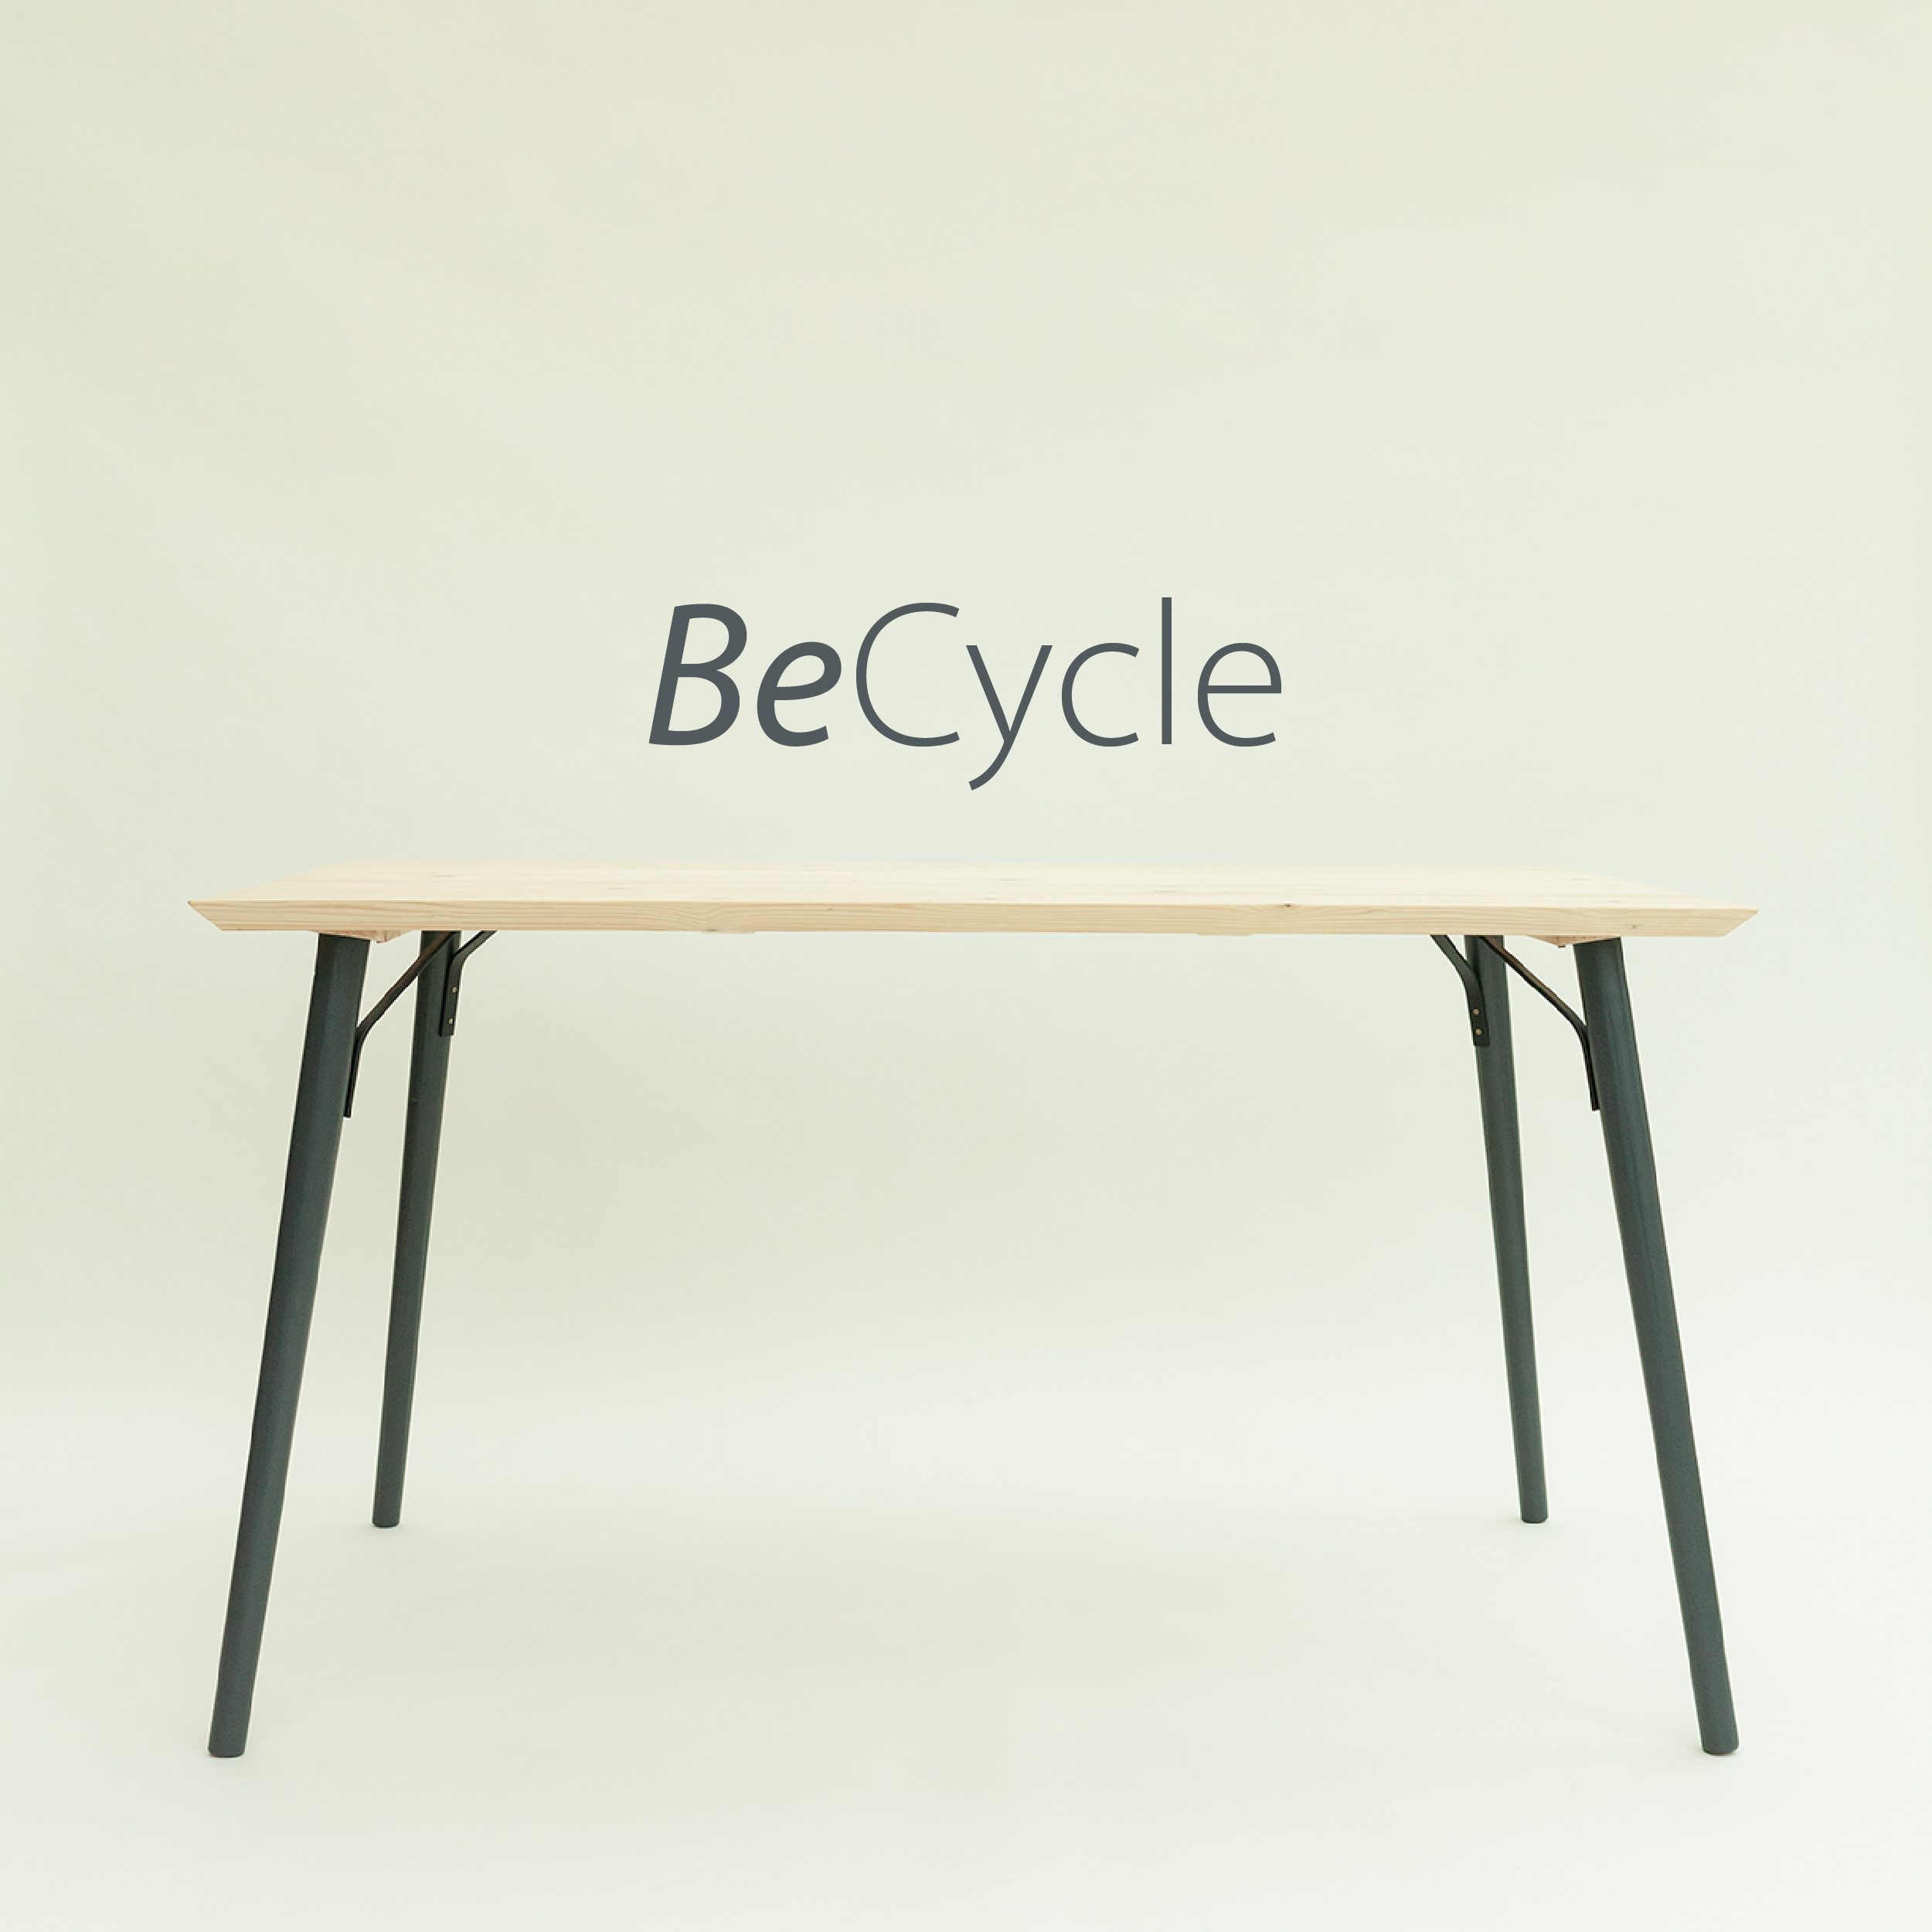 Becycle website A-01